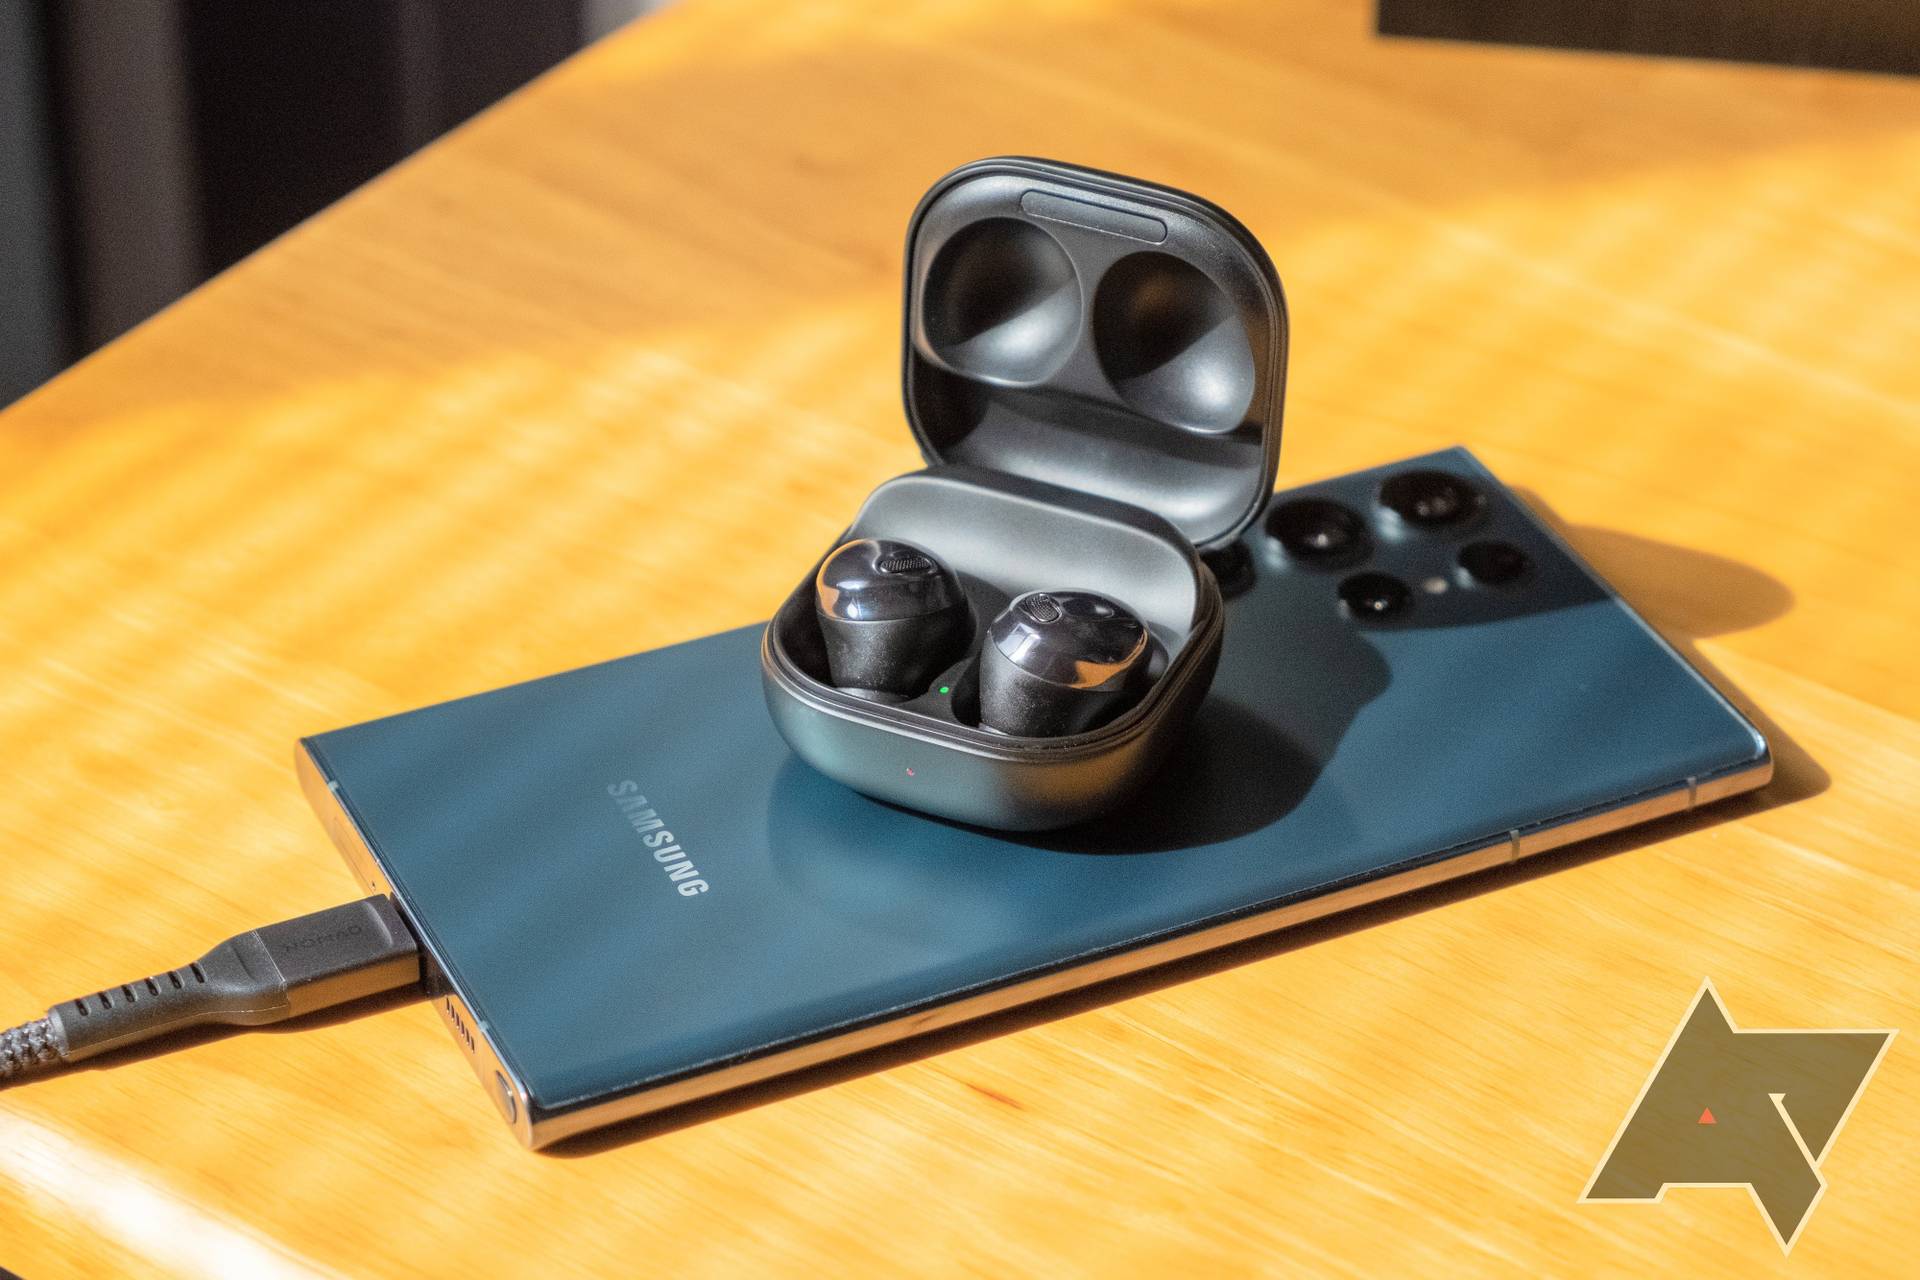 Samsung Galaxy Buds 2 Pro unlikely to arrive at August's Galaxy Unpacked event